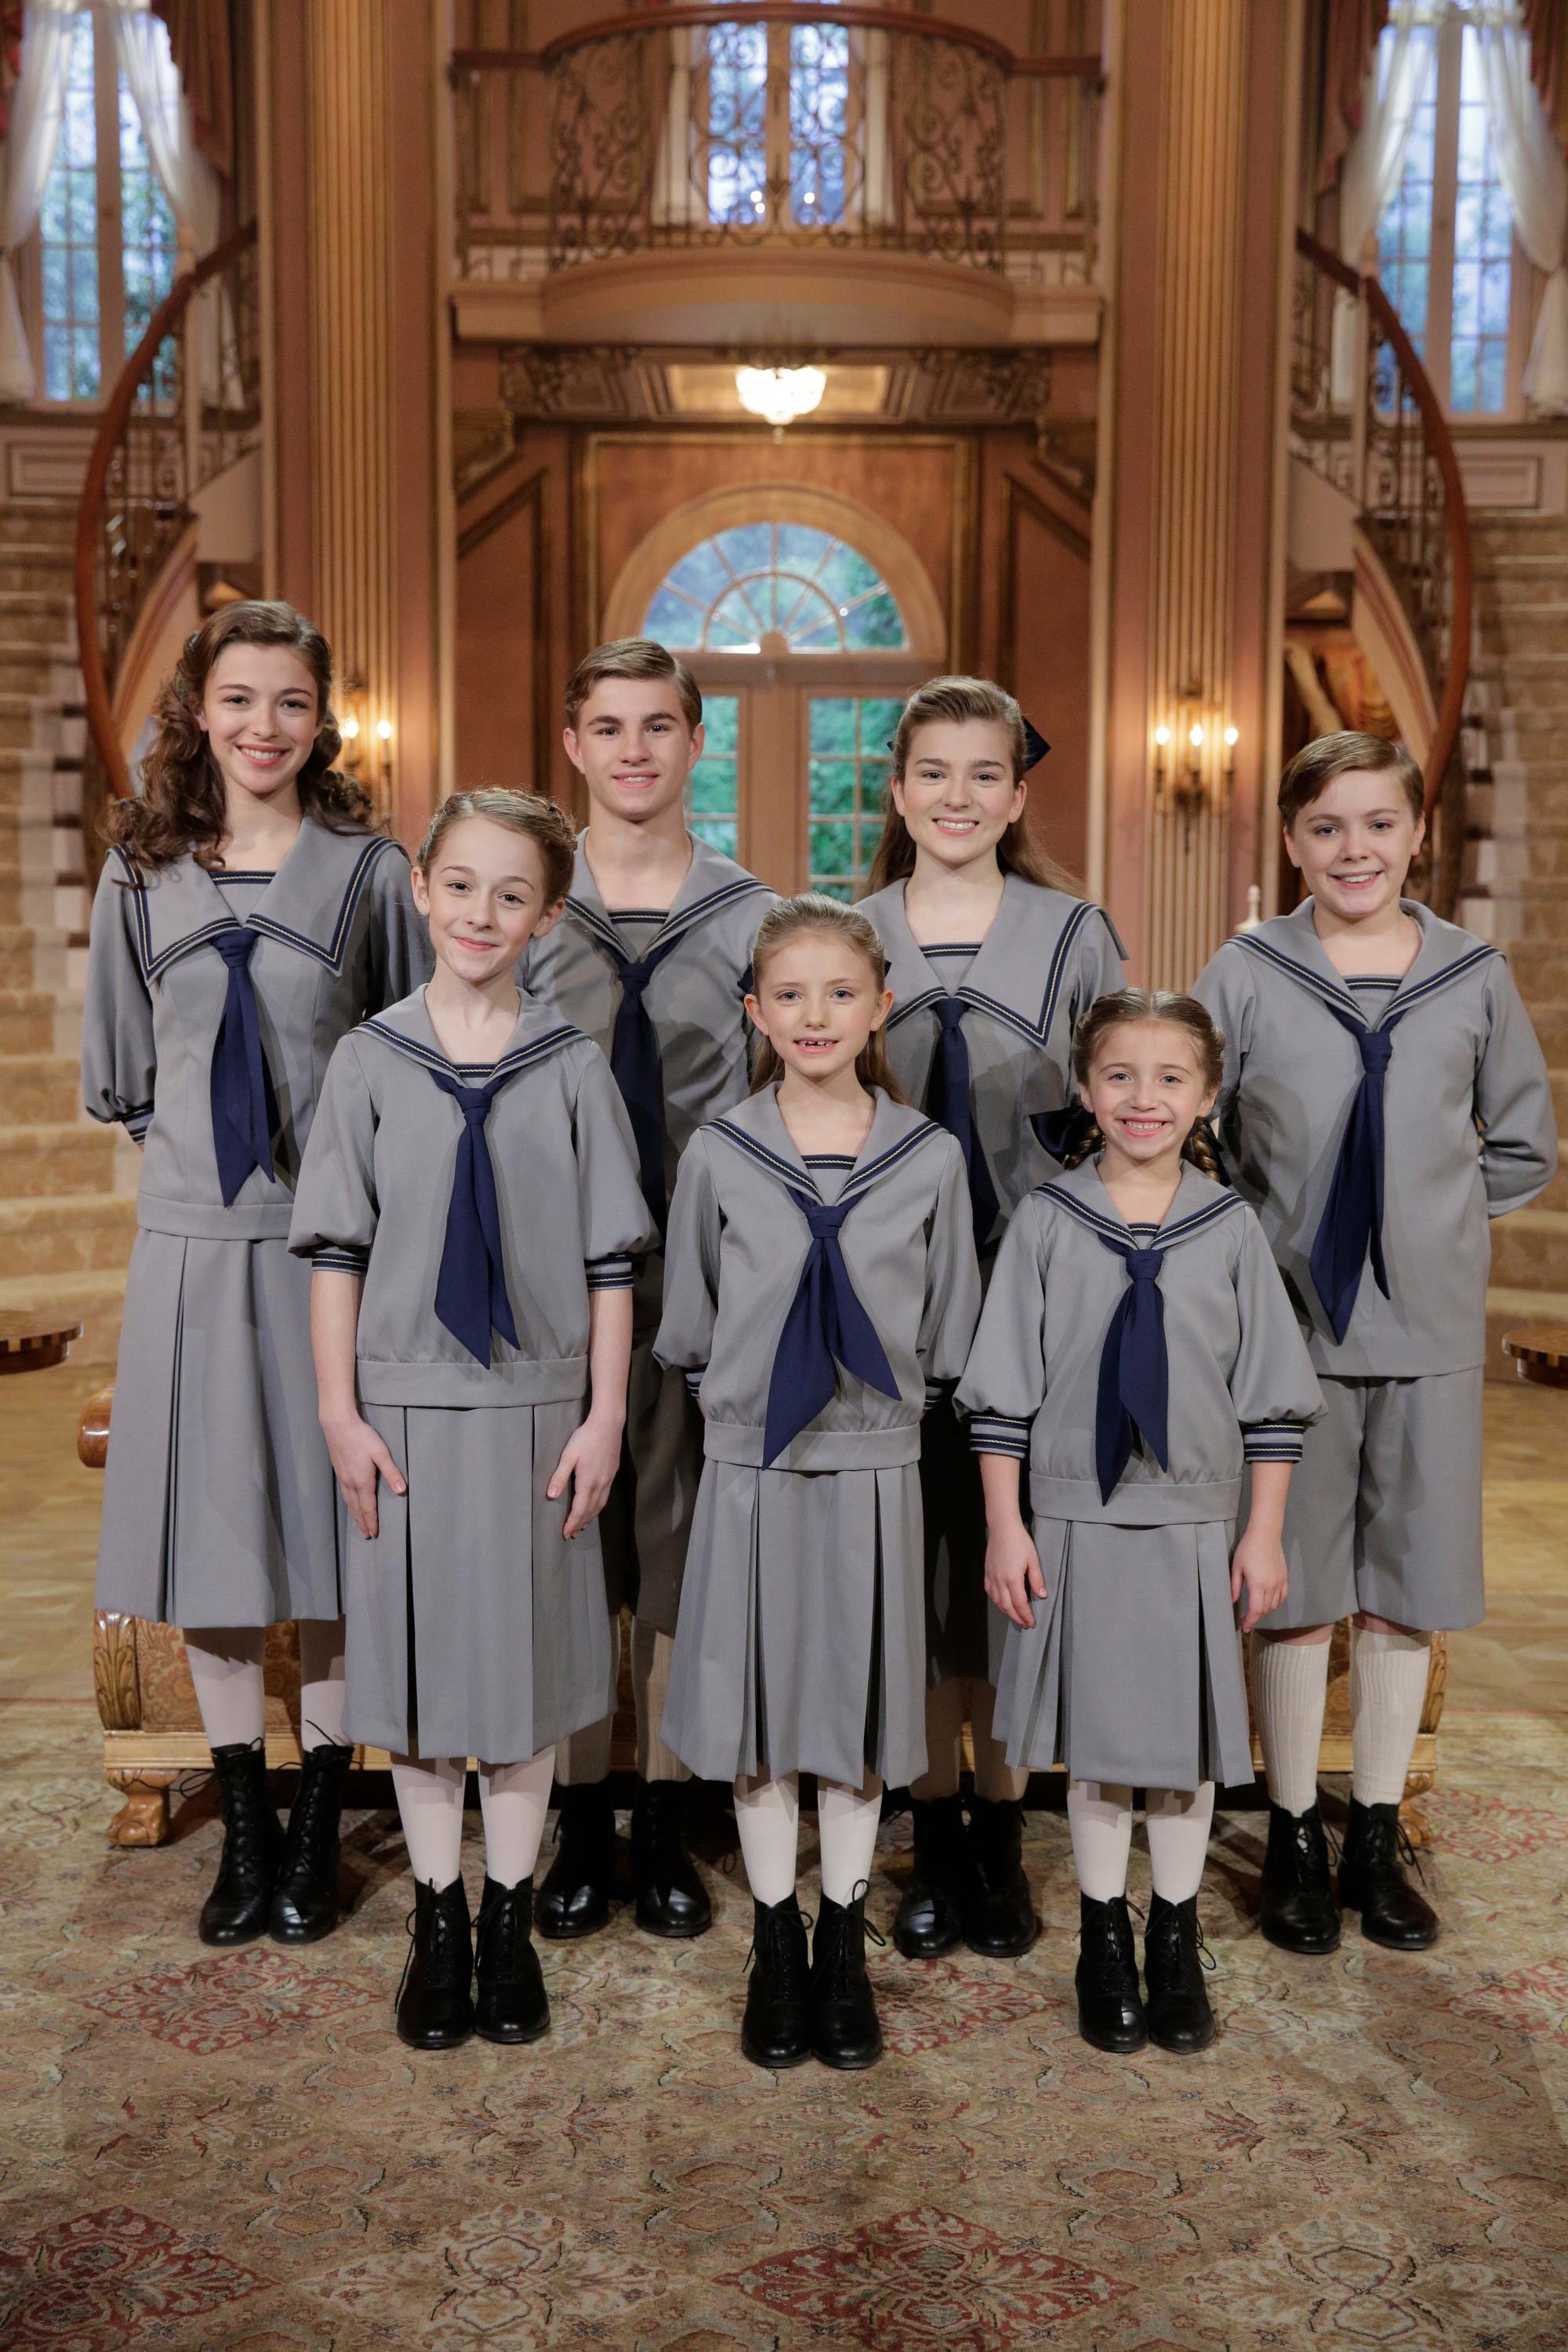 A photo from the 2013 television broadcast of The Sound of Music.